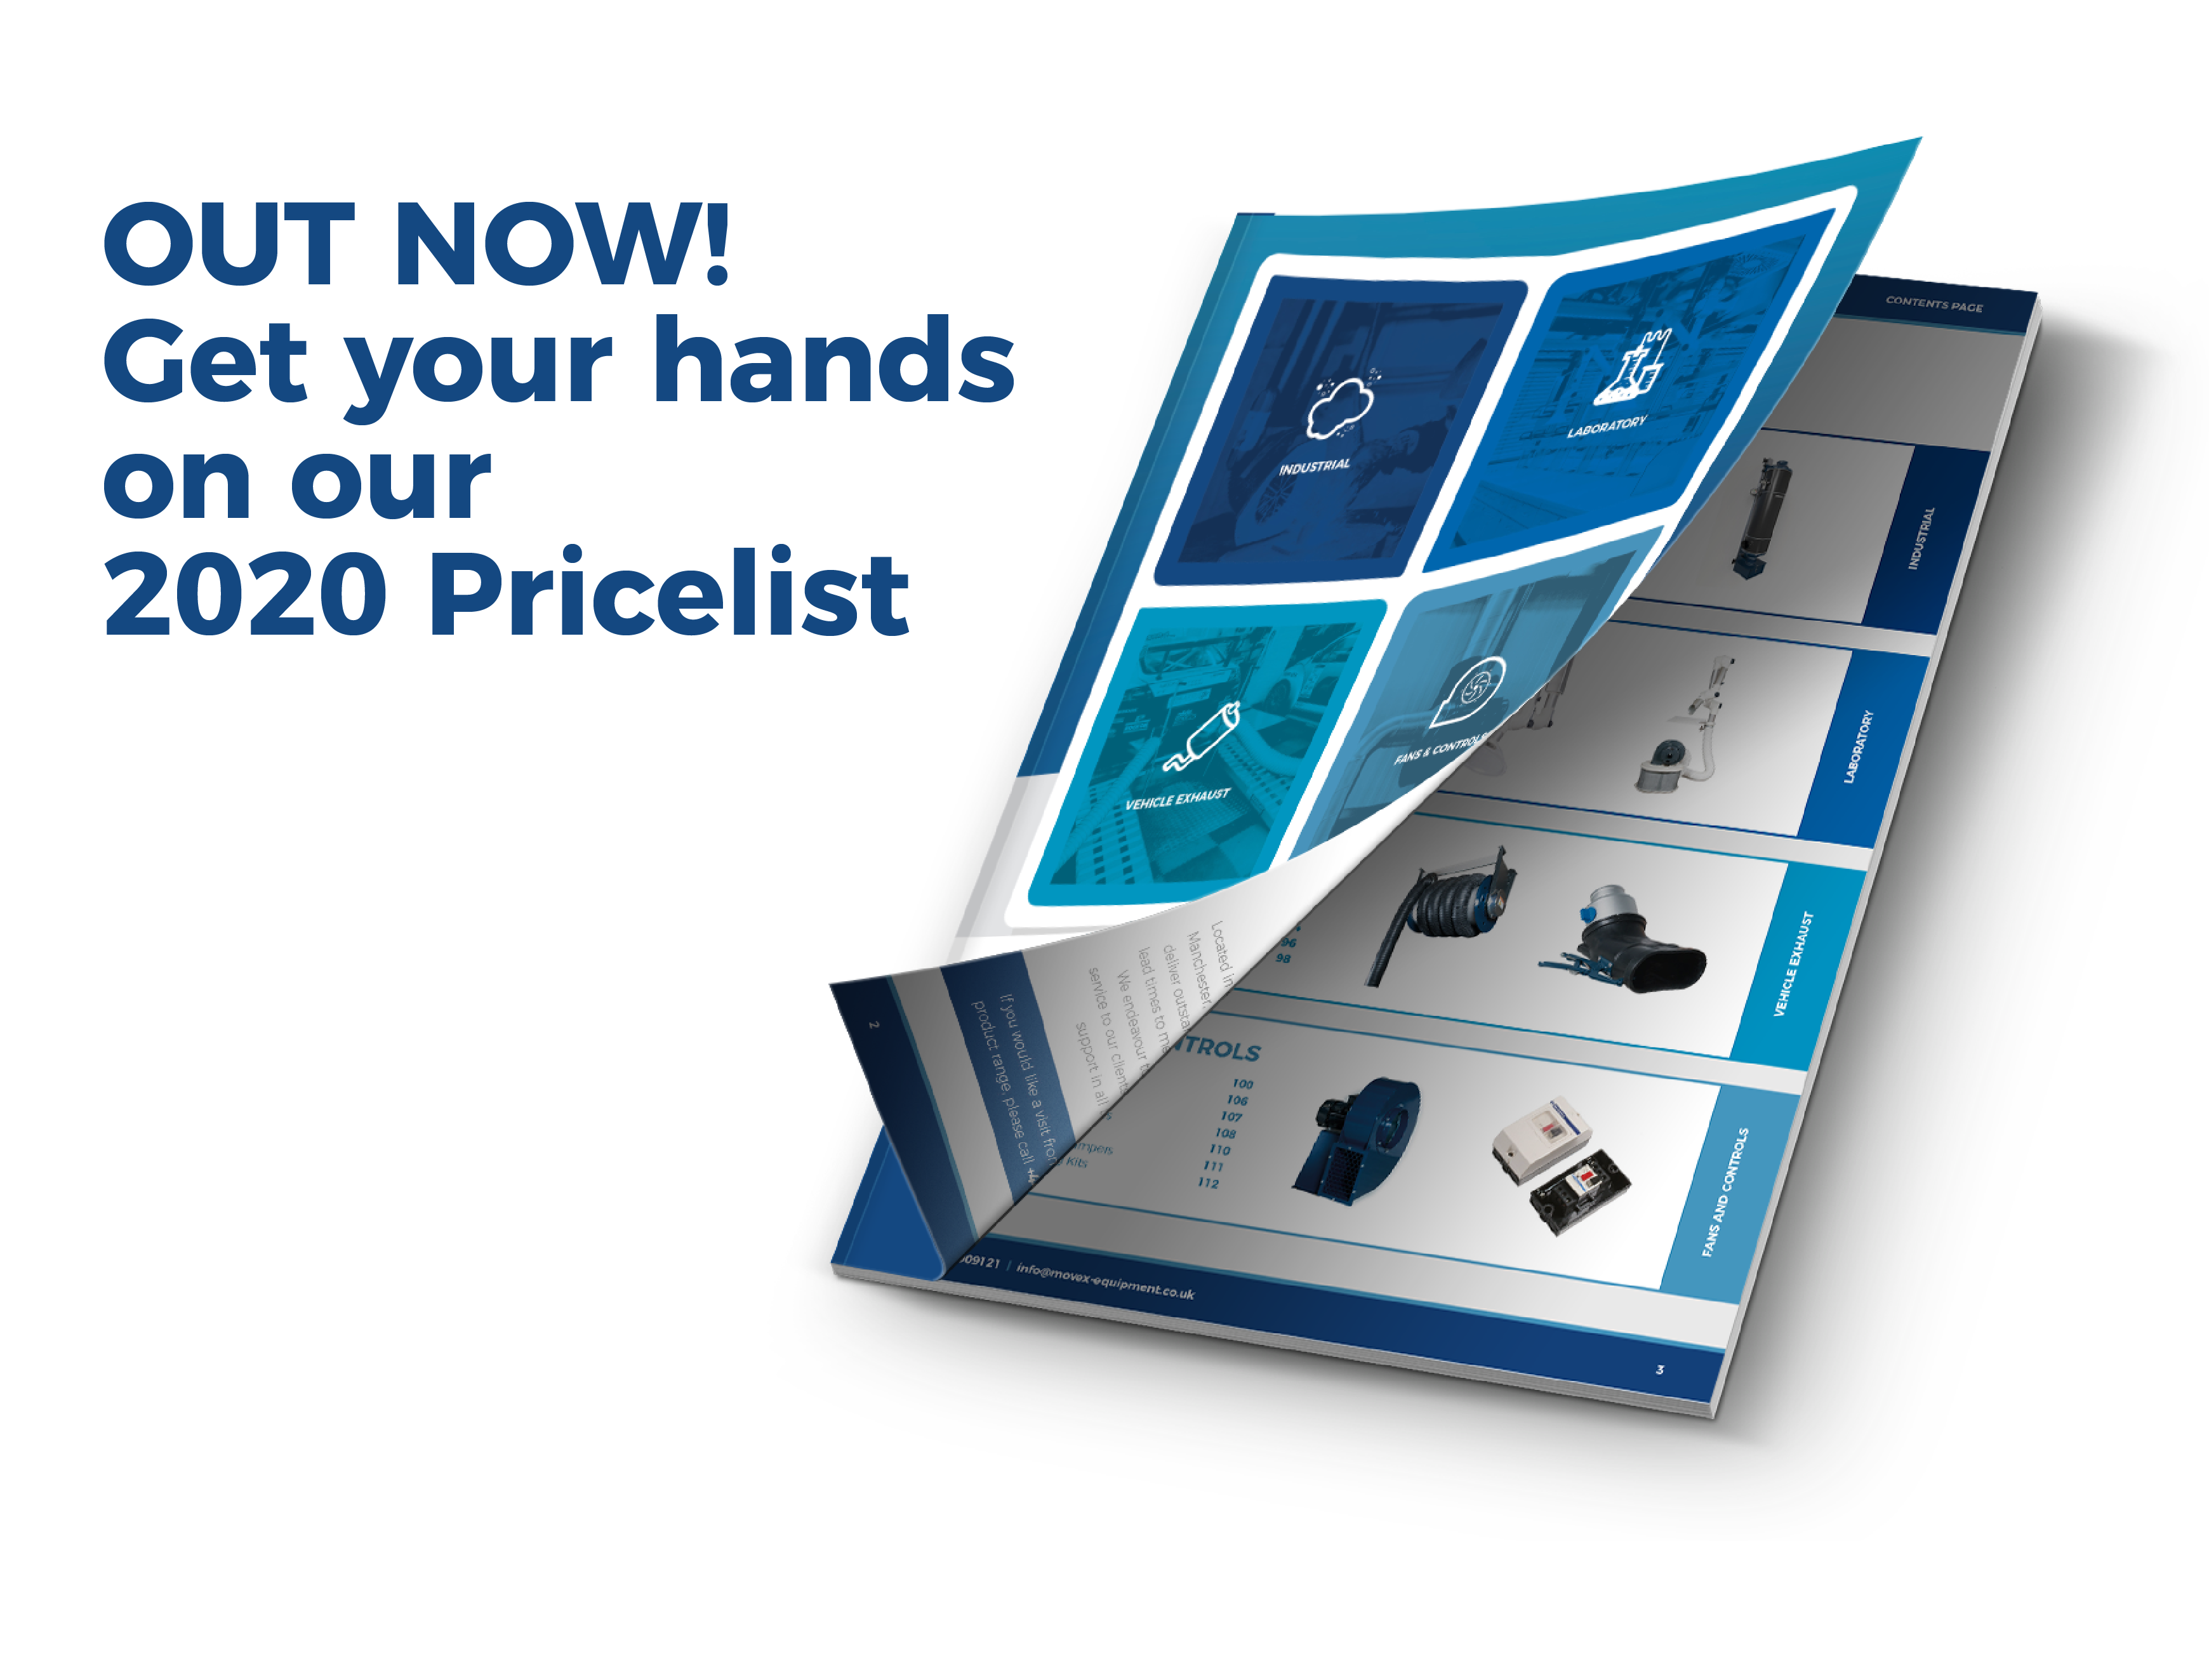 Out Now! Get your hands on our 2020 Pricelist